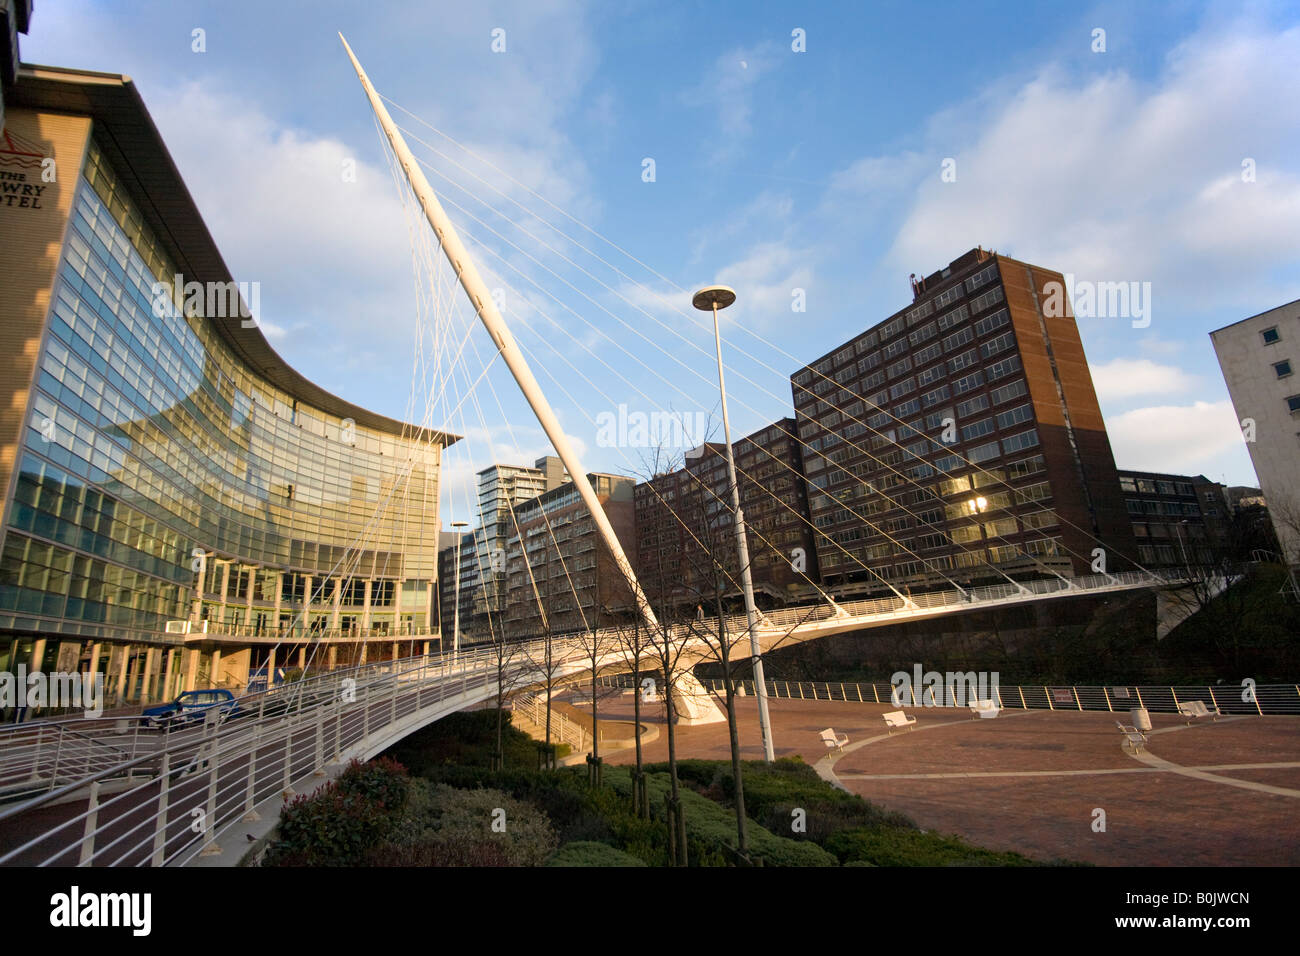 Trinity Bridge over the River Irwell. Manchester, Greater Manchester, United Kingdom. Stock Photo